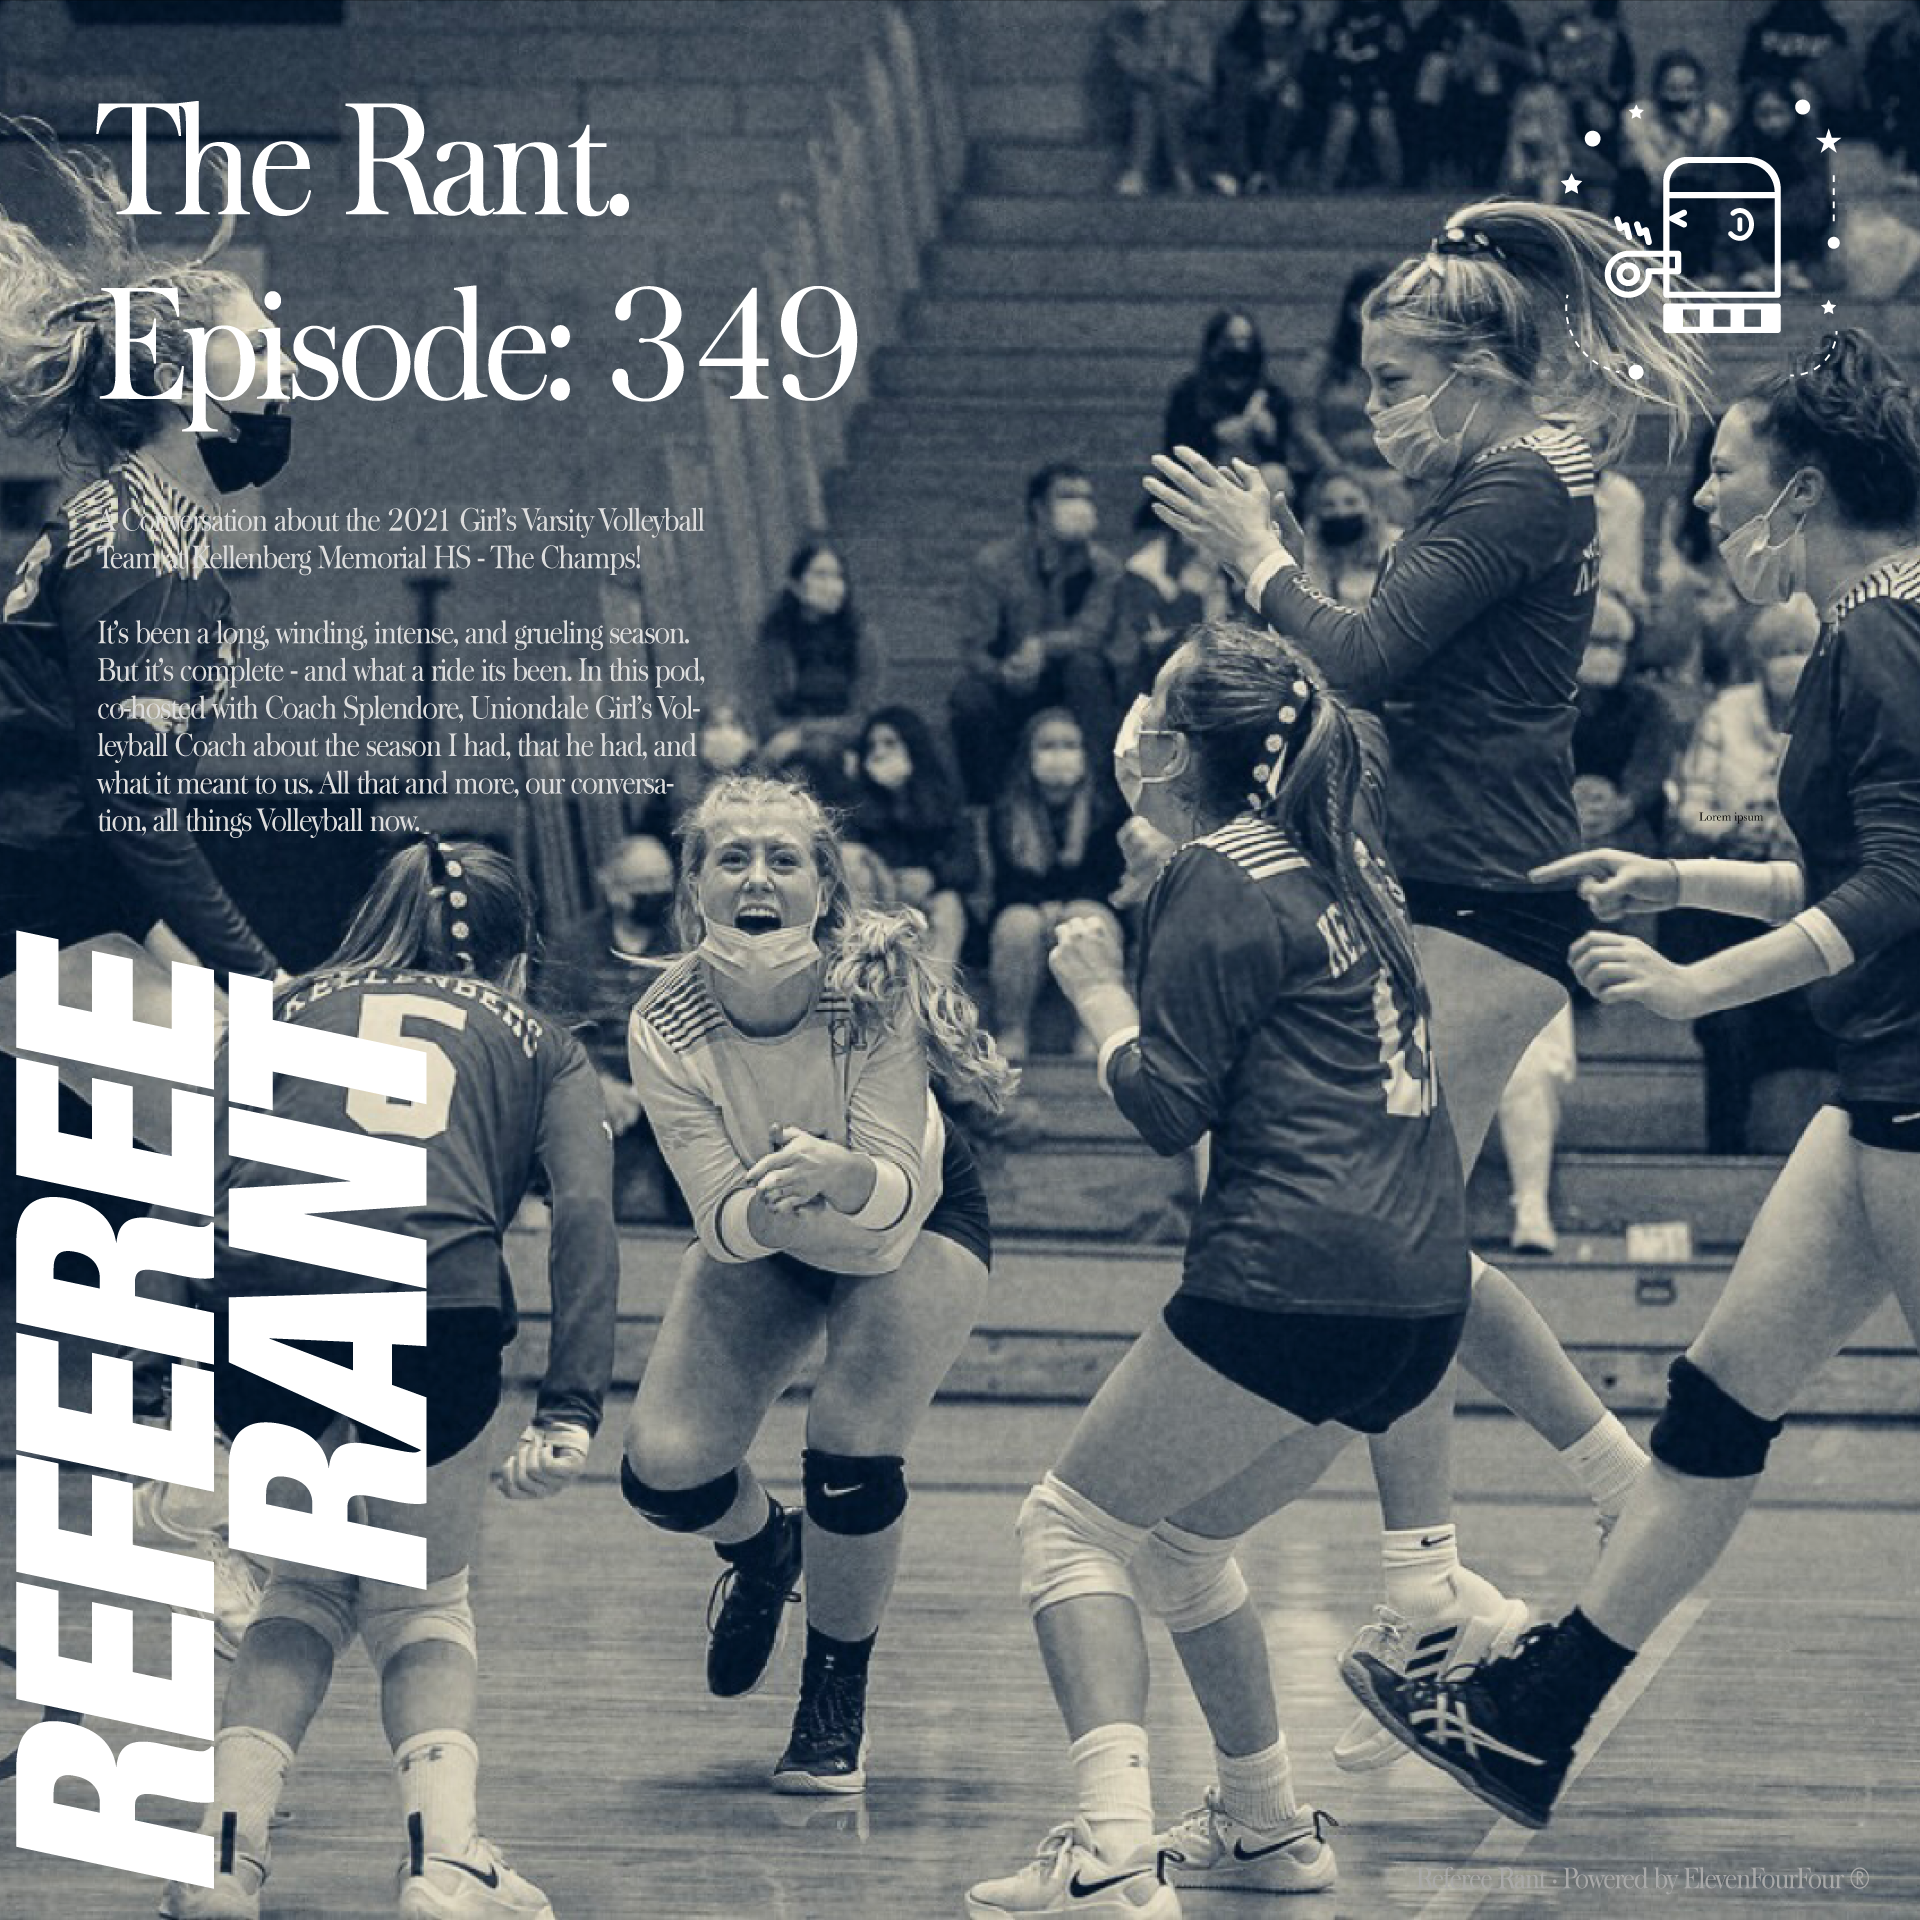 Episode 349, The Rant: A Conversation about the 2021 Girl’s Varsity Volleyball Team at Kellenberg Memorial HS - The Champs!